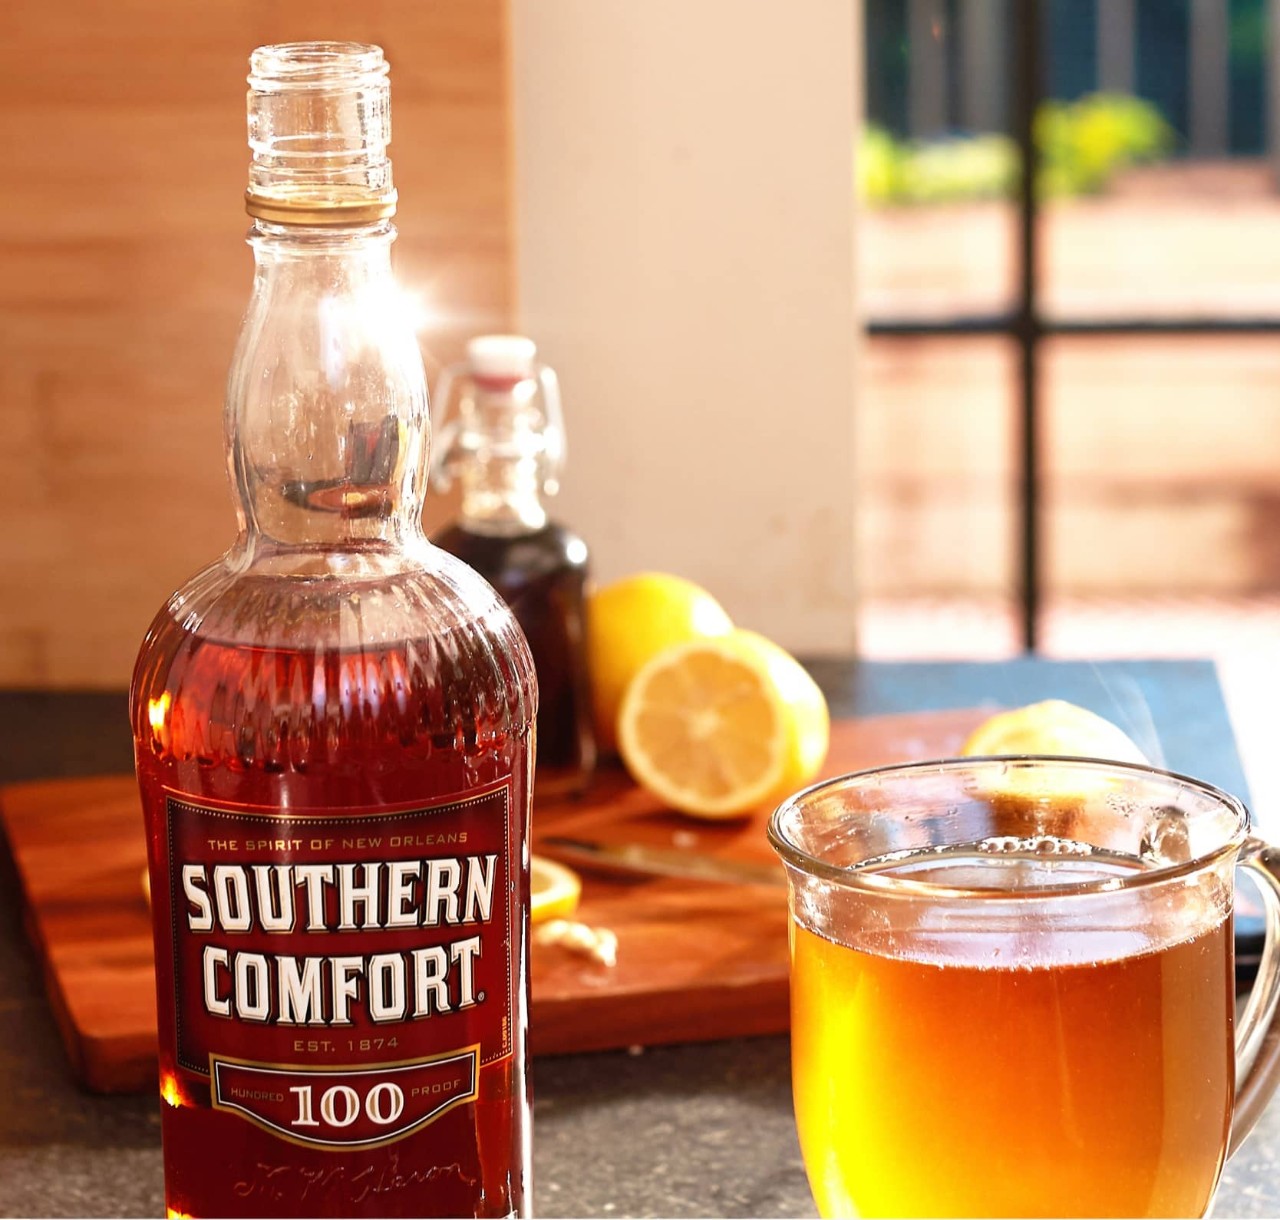 Southern Comfort Hot Toddy Recipe